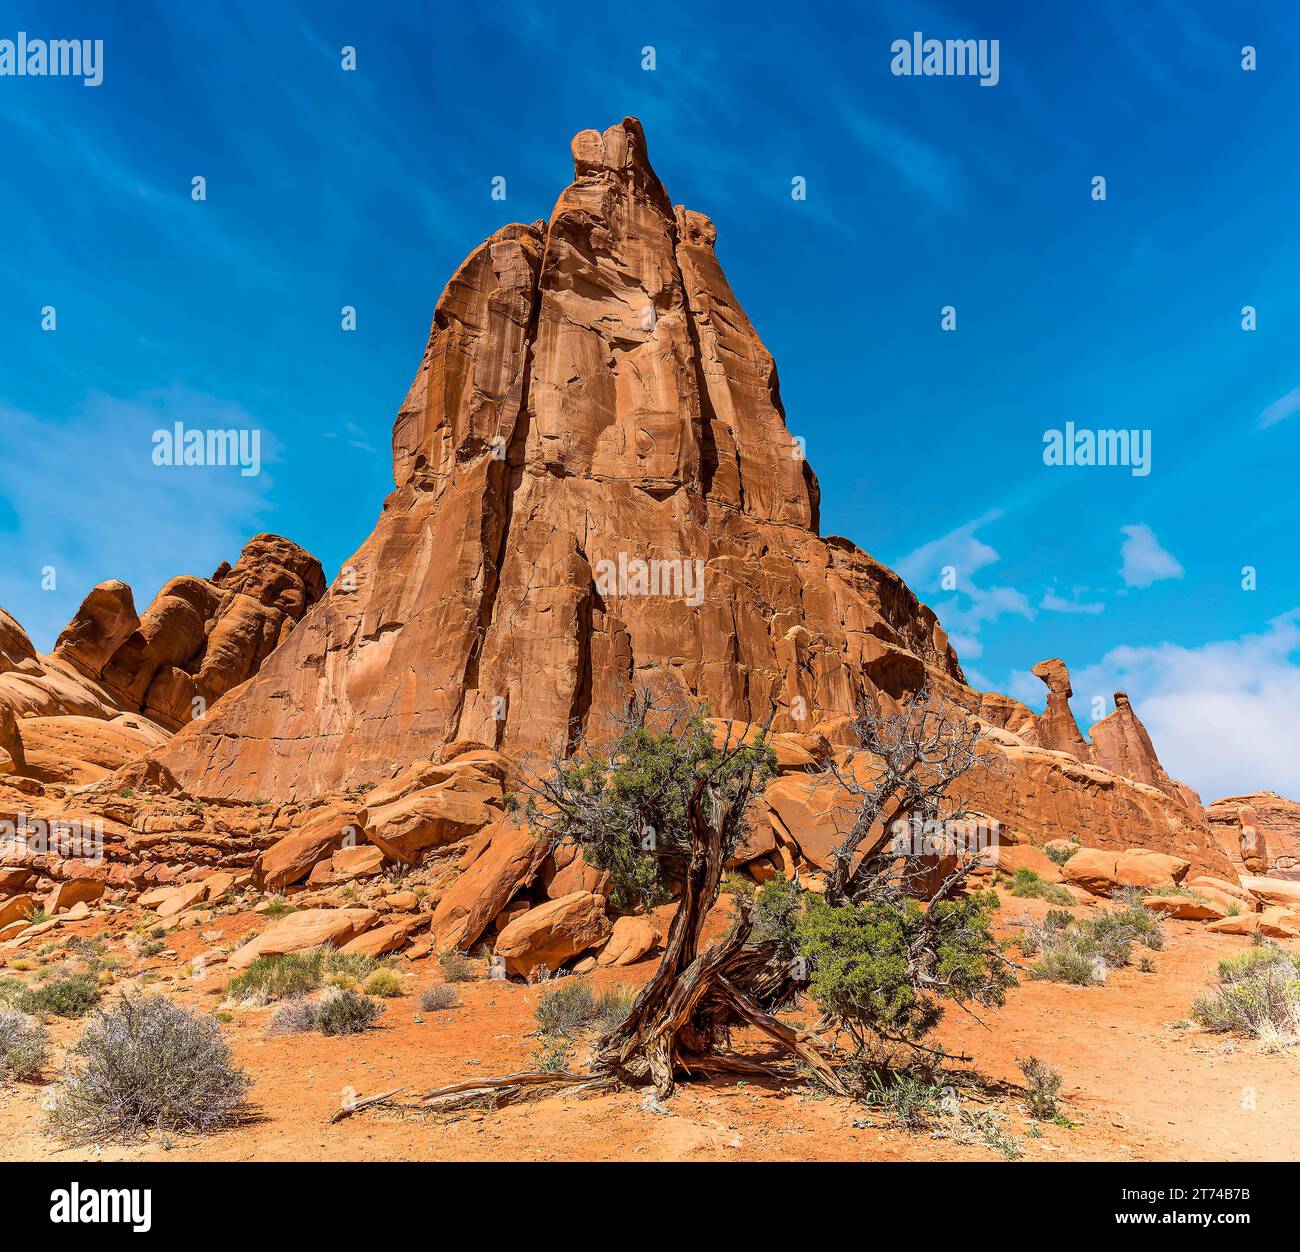 Towering Butte at Park Avenue Trail head viewpoint in Arches National Park, Moab, Utah in springtime Stock Photo